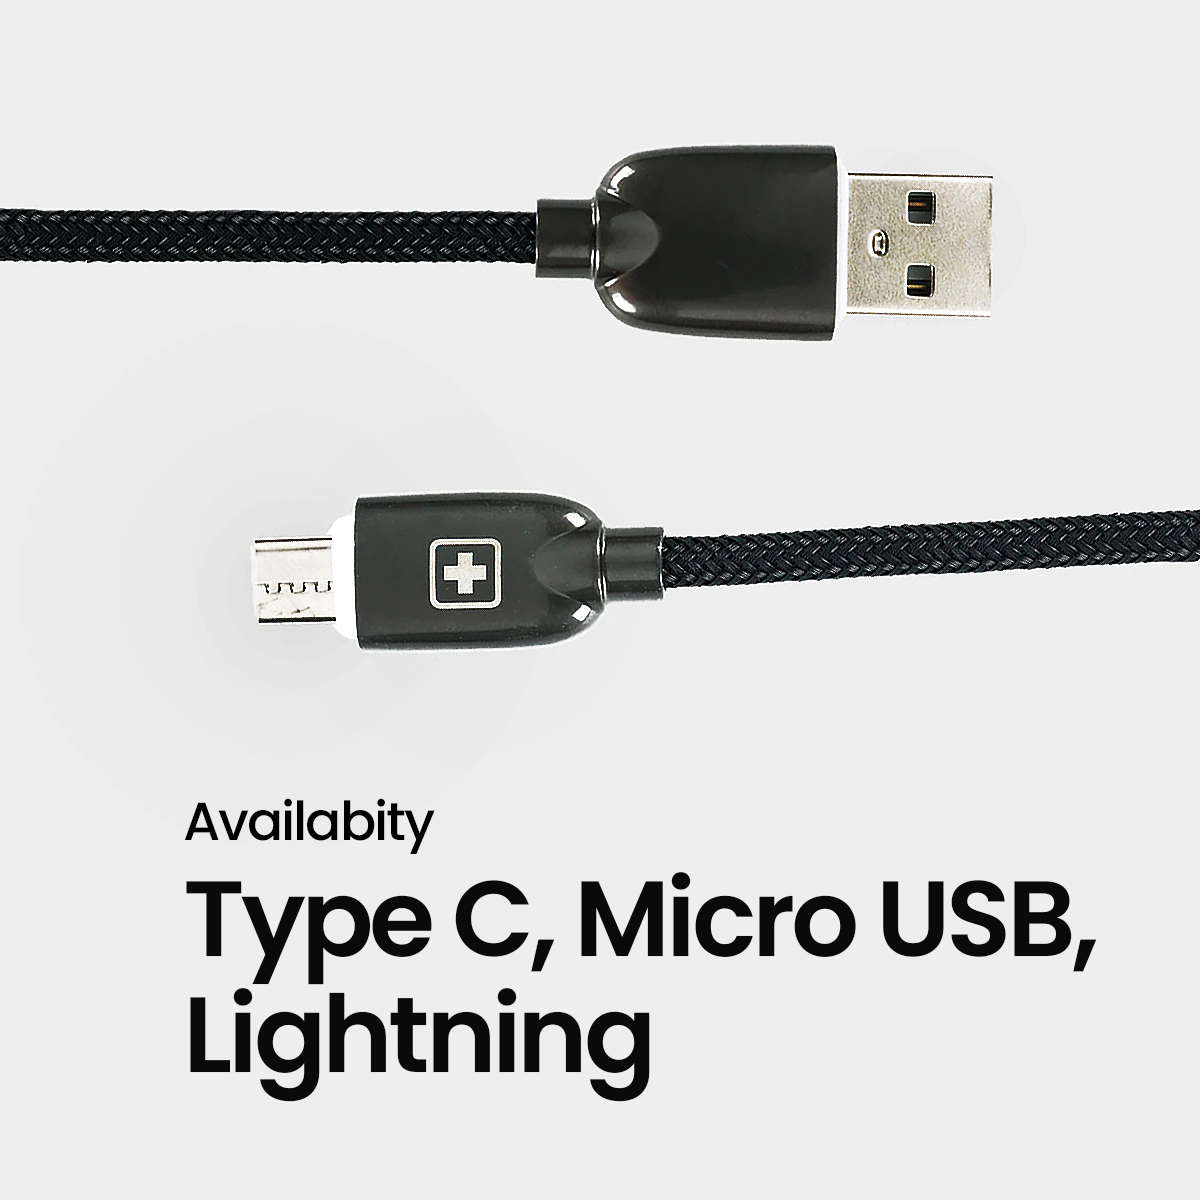 FNO1 CHARGING CABLE: CHARGE WITH CONFIDENCE ANYWHERE, ANYTIME!